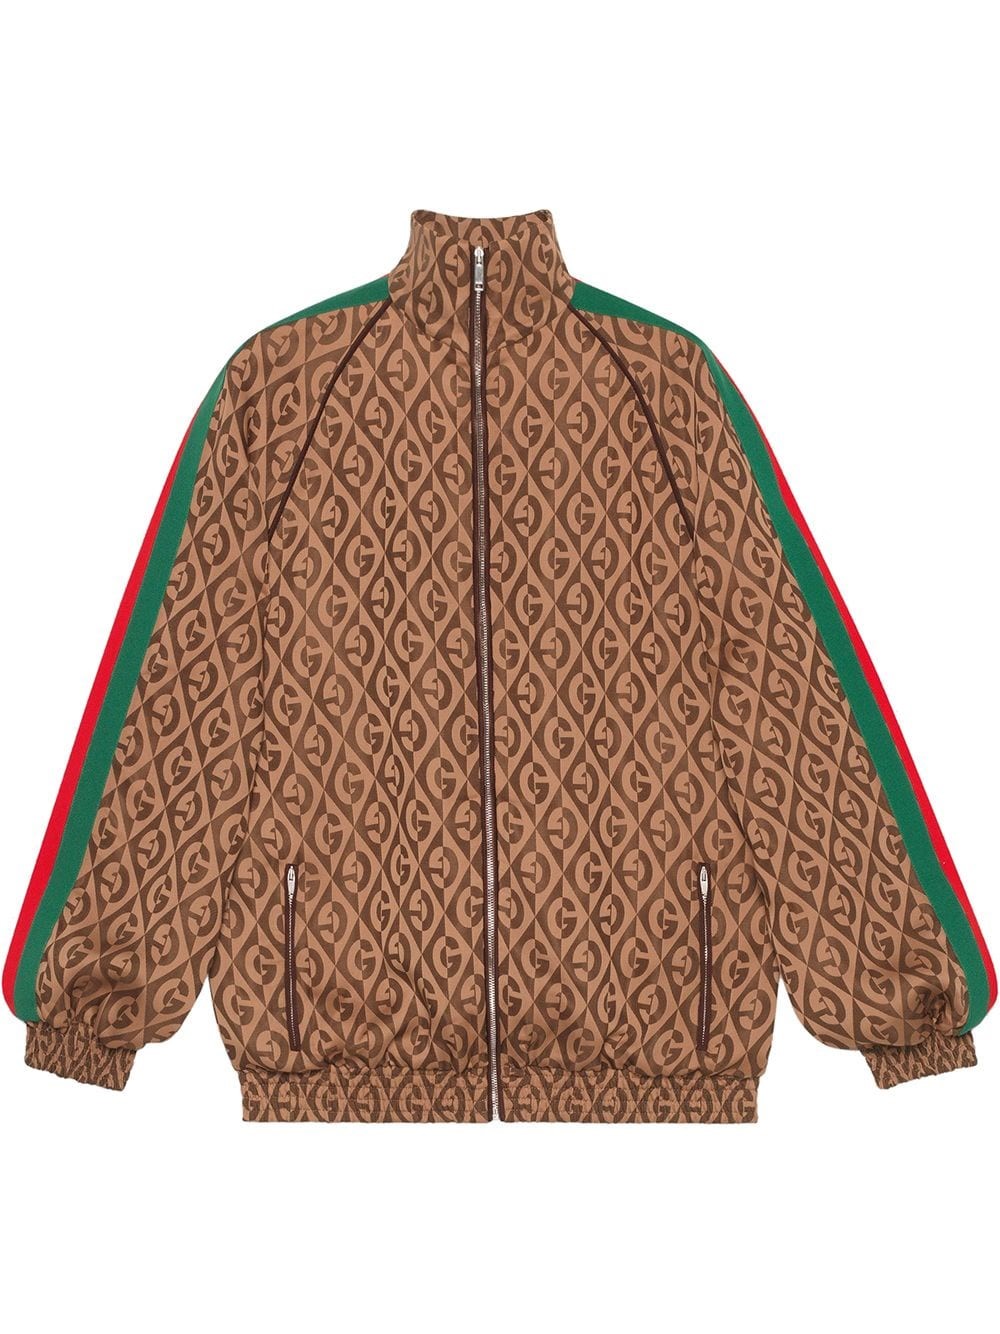 gucci ZIPPED LOGO JACKET available on montiboutique.com - 31352